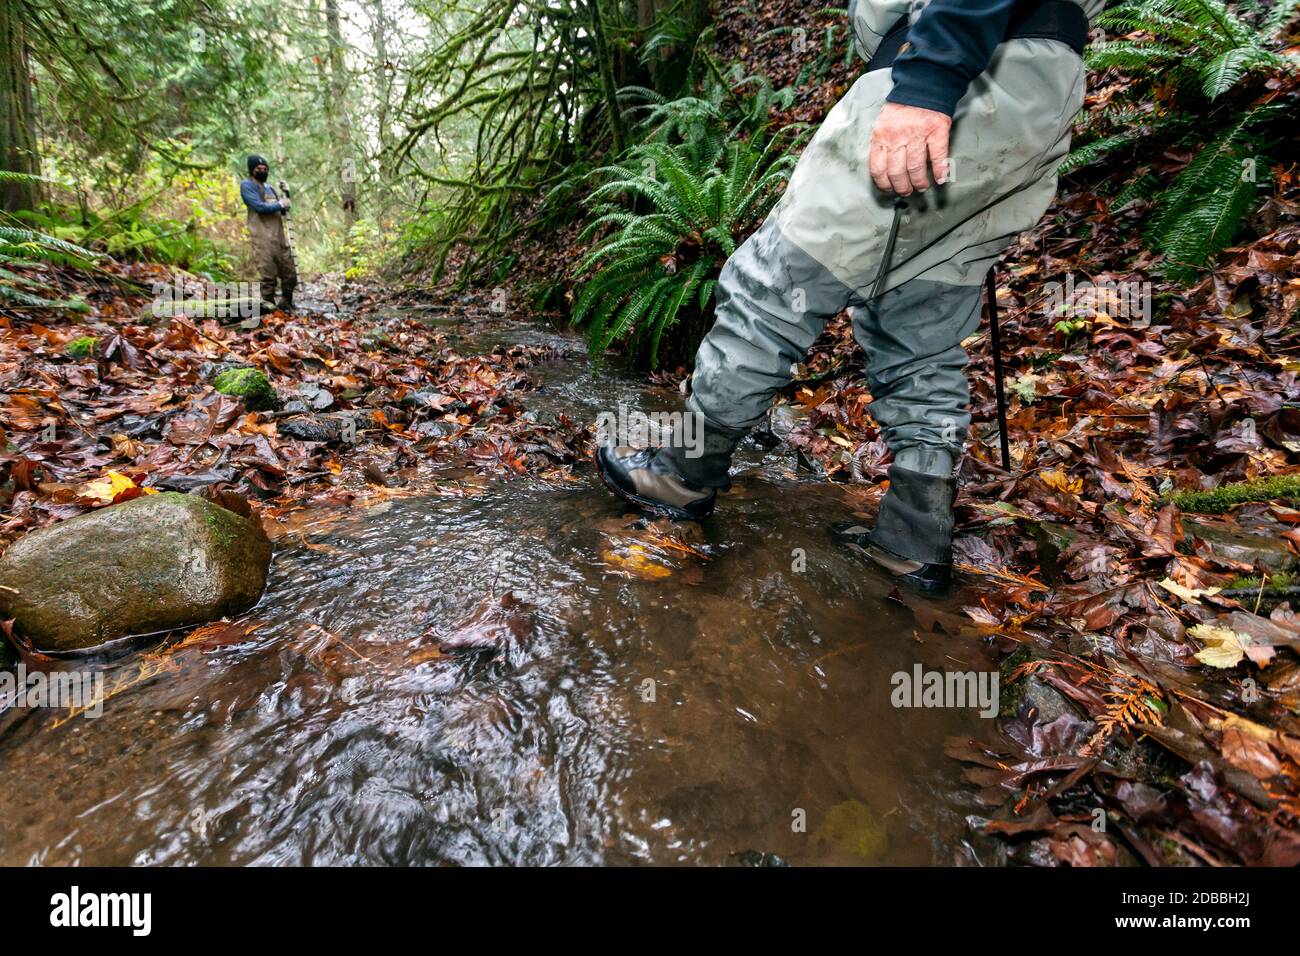 WA17944-00.....WASHINGTON - Nicolas and Erik looking for spawning salmon in English Creek a tributary of the Skaget River. Nicolas and Erik are volunt Stock Photo